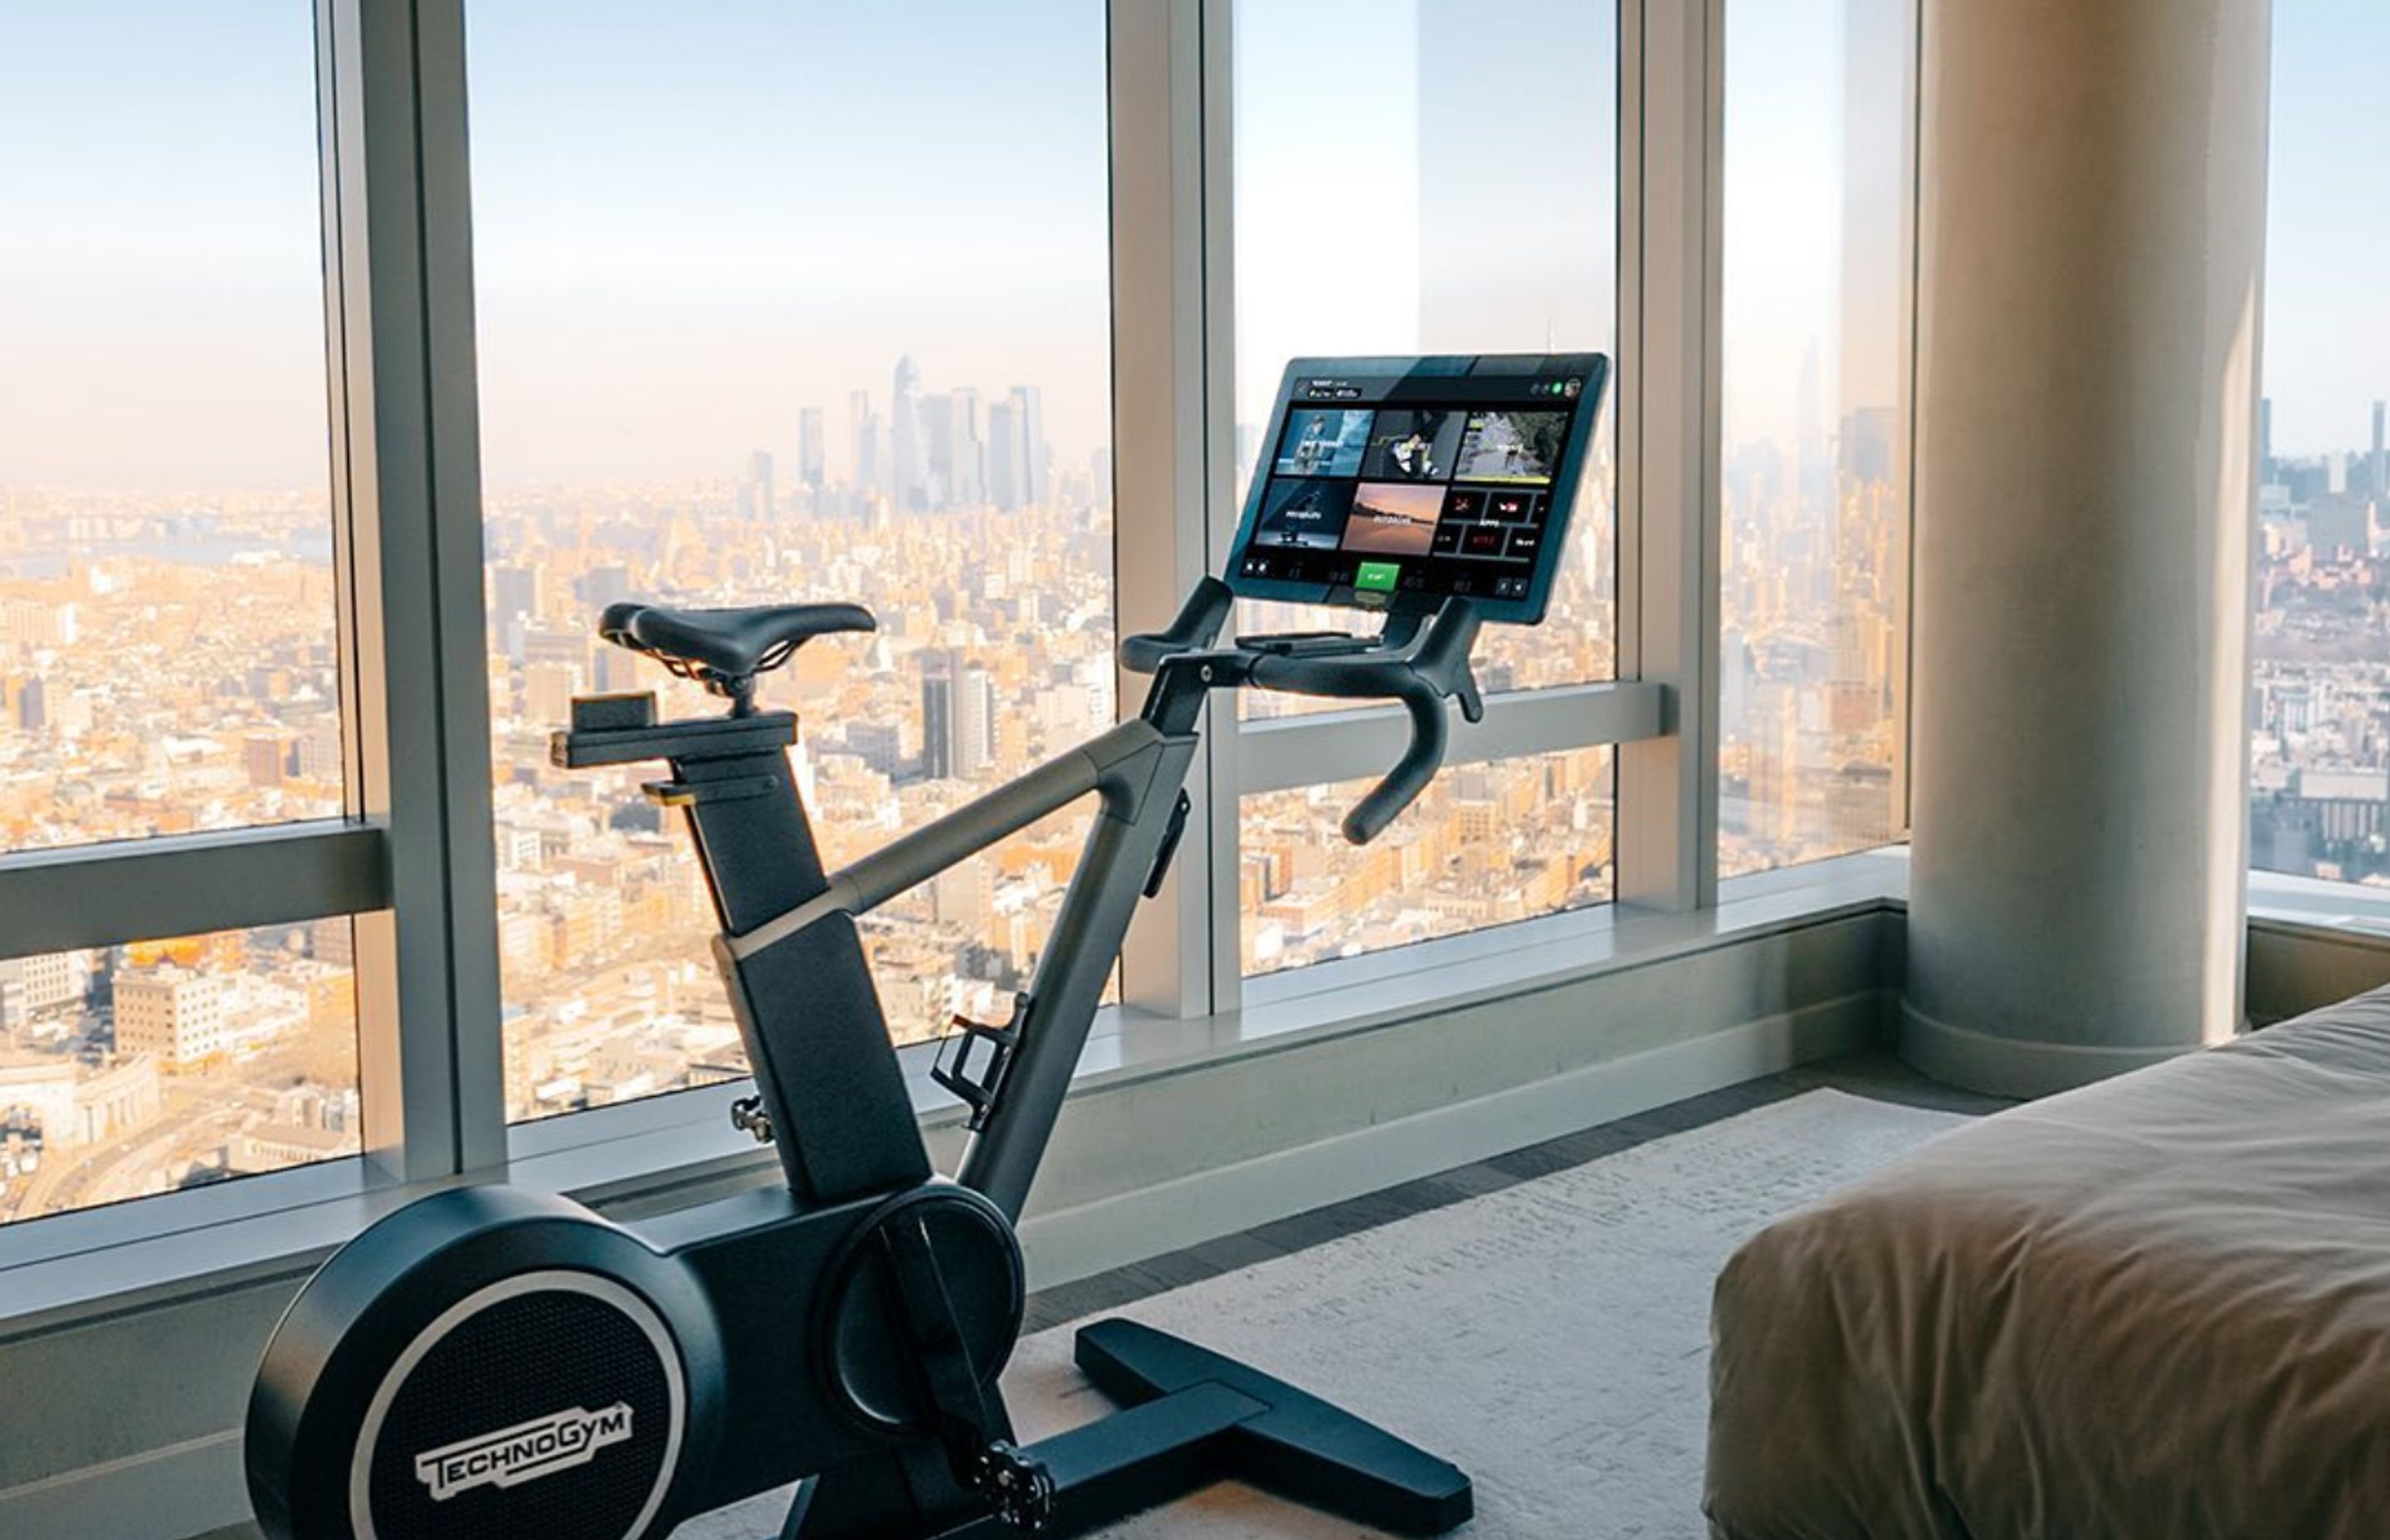 "The Technogym Ride is the first all-in-one bike with integrated display for a personalised training with your favourite apps, on-demand trainers and outdoor tracks."